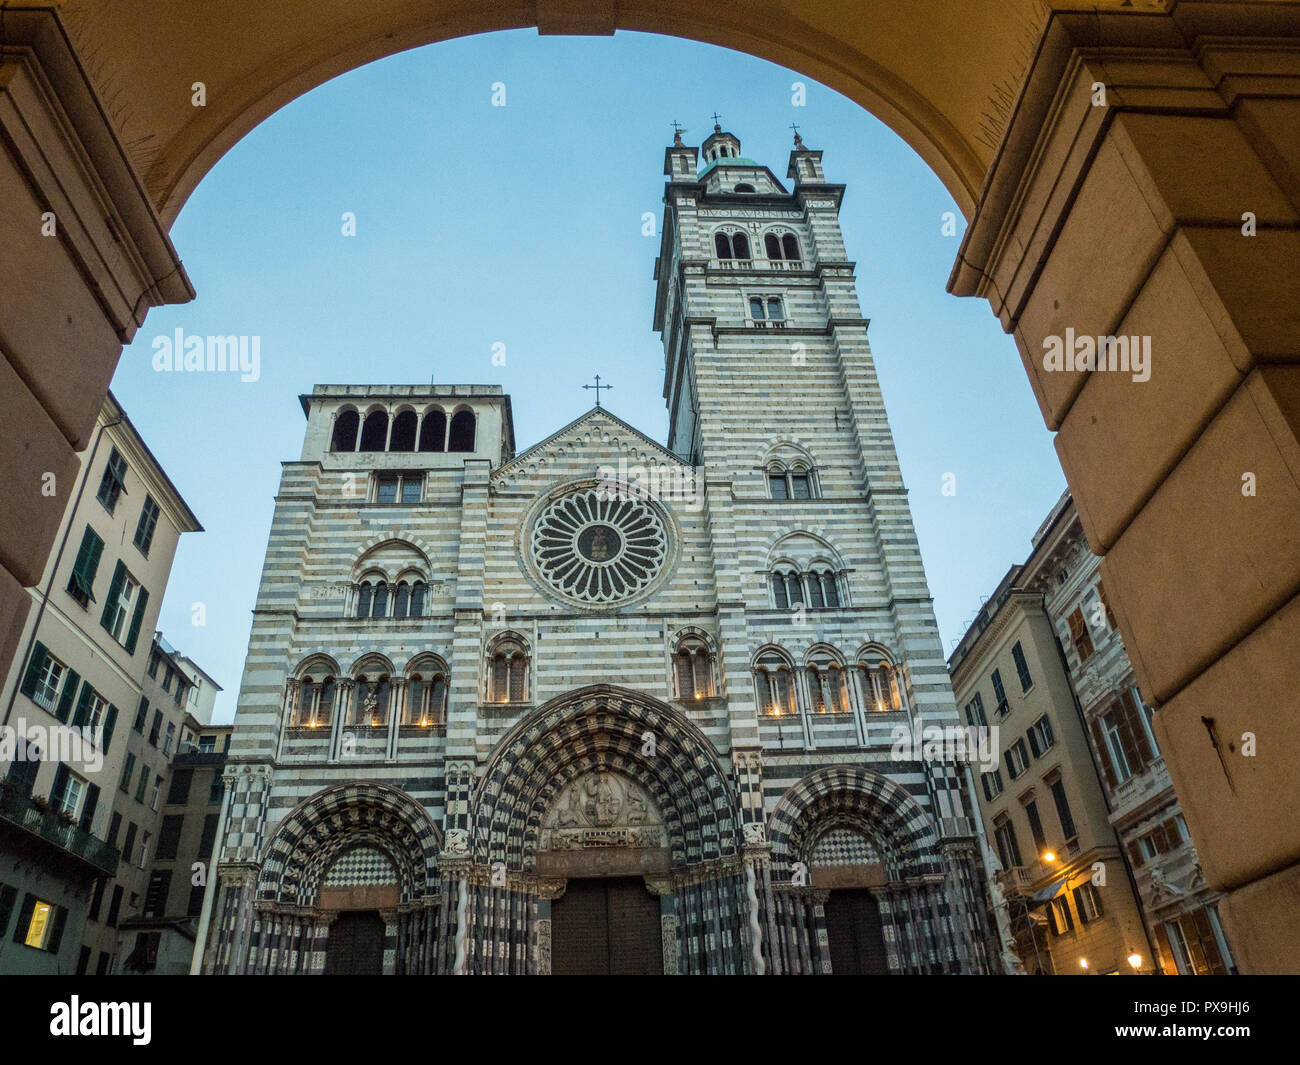 Cattedrale di San Lorenzo (Cathedral of St Lawrence) in the evening, a roman catholic church in the port city of Genoa, Liguria region, Italy. Stock Photo